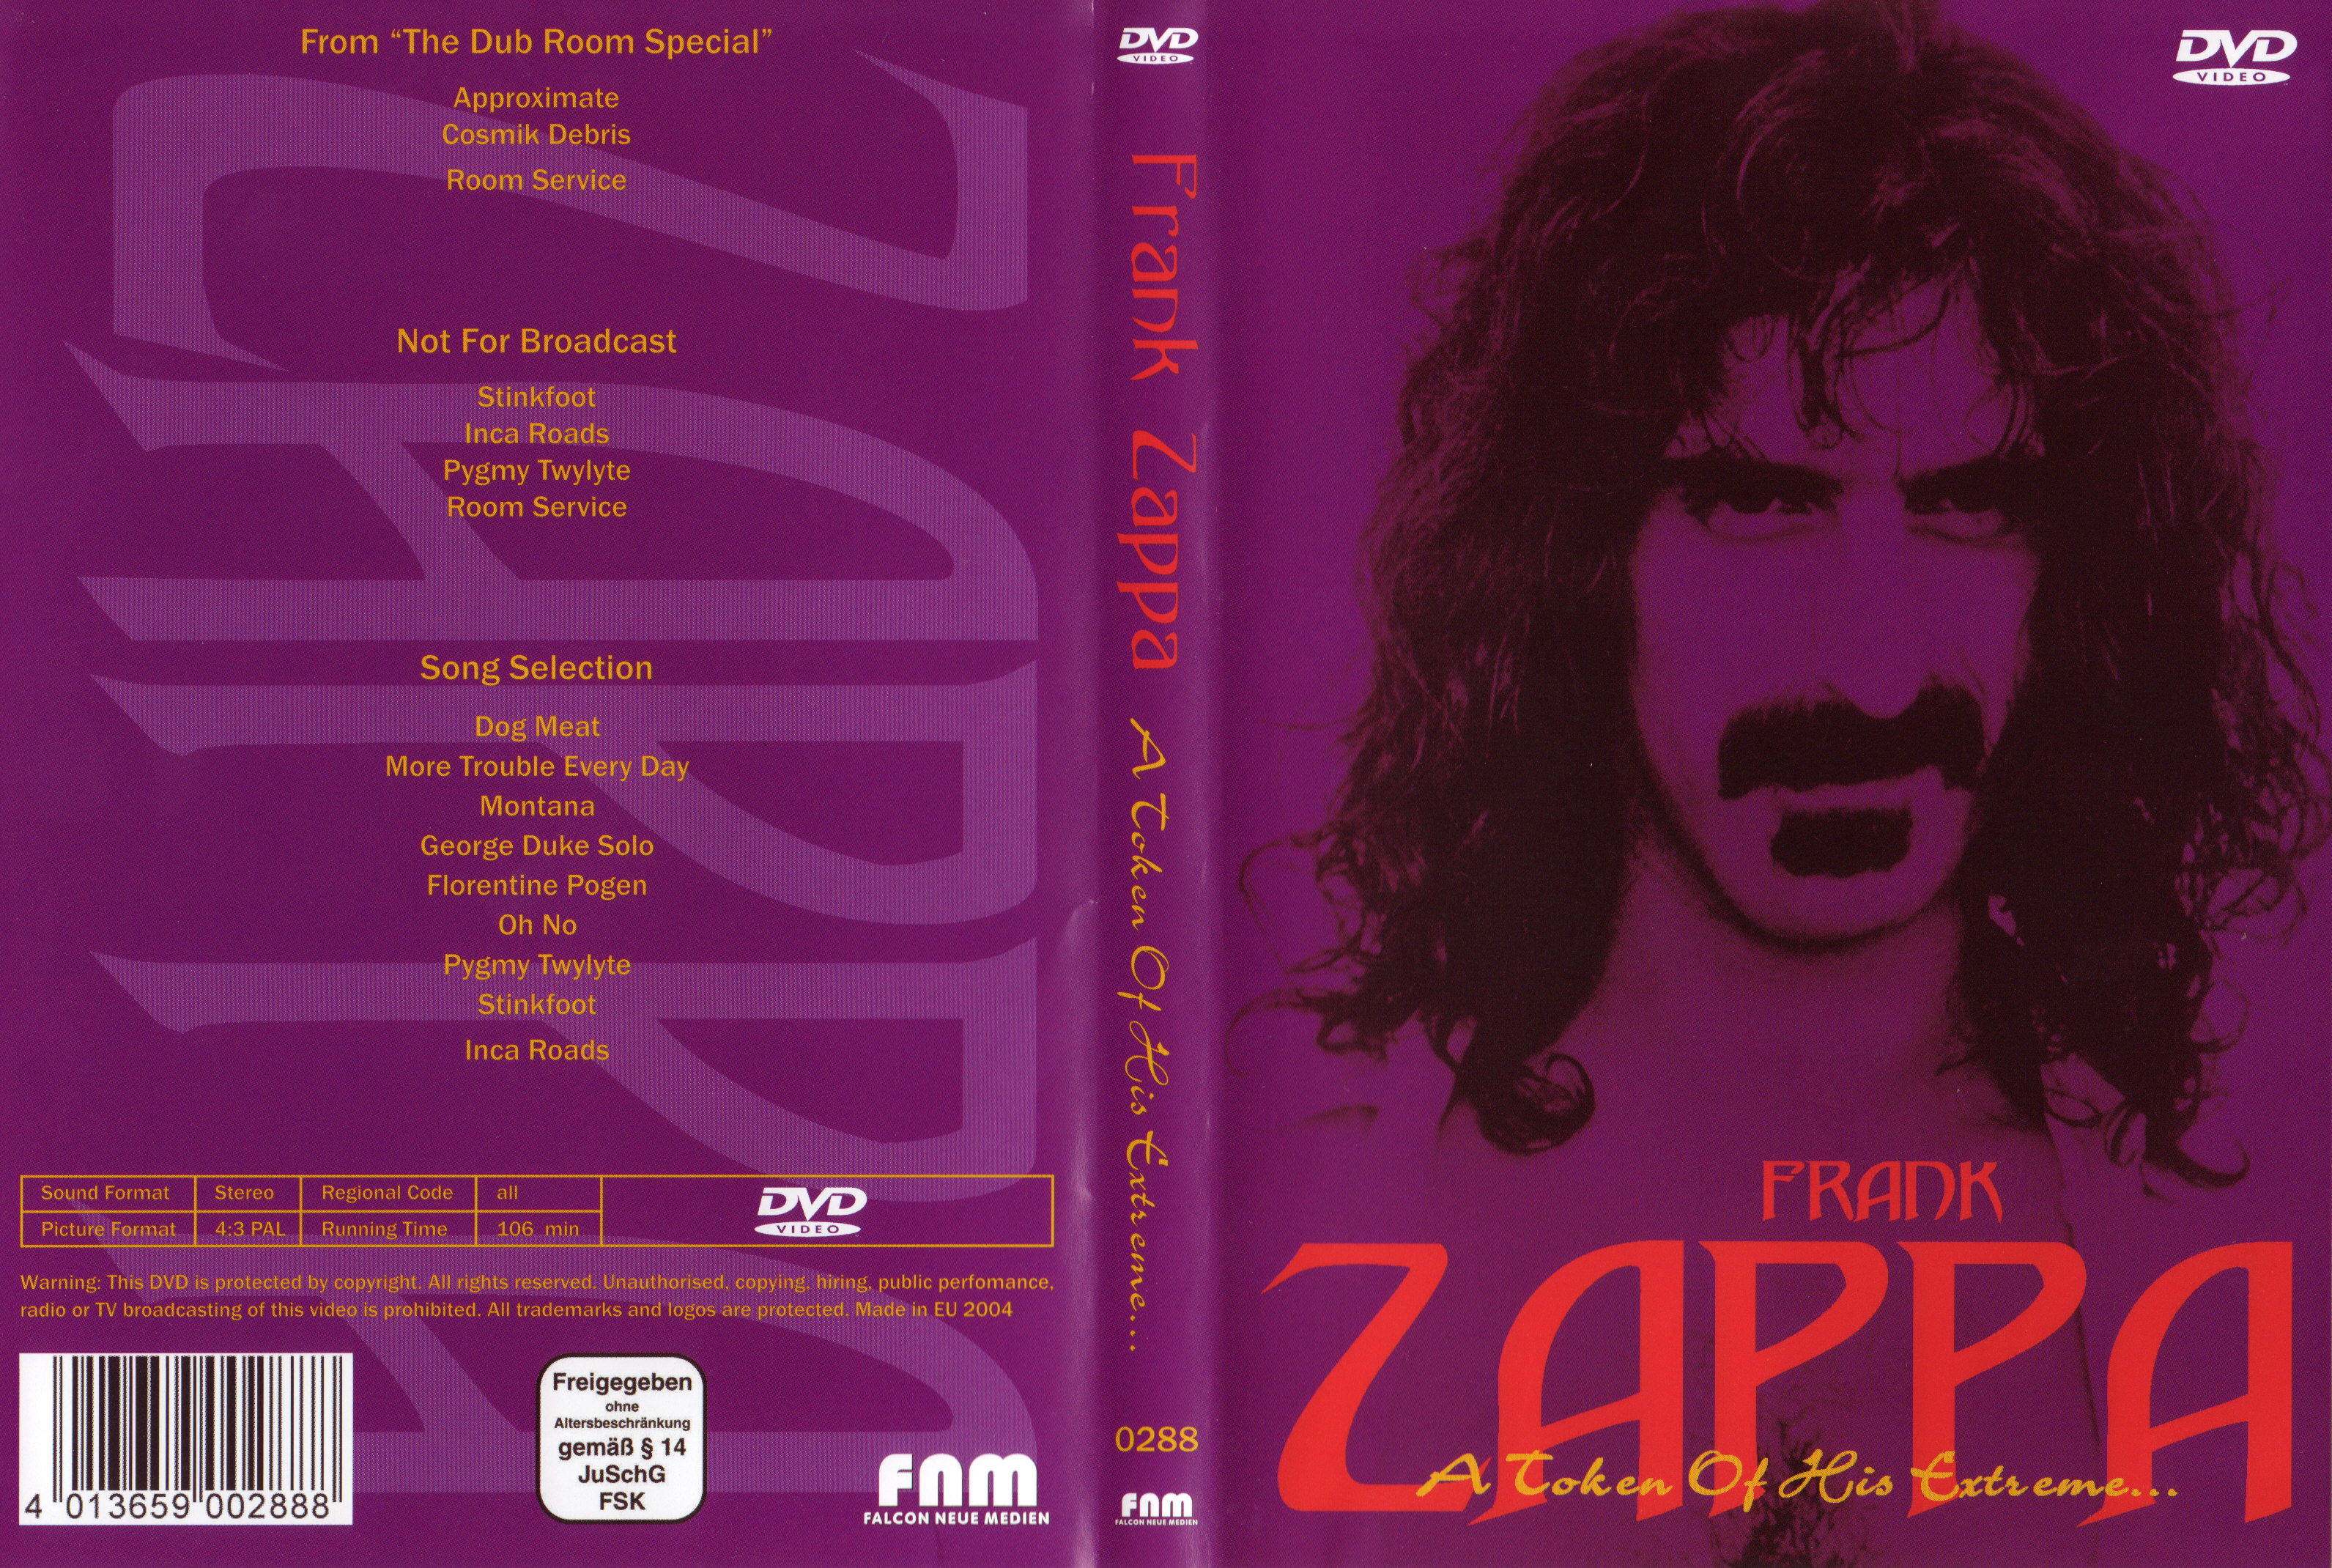 Jaquette DVD Frank Zappa A token of his extreme